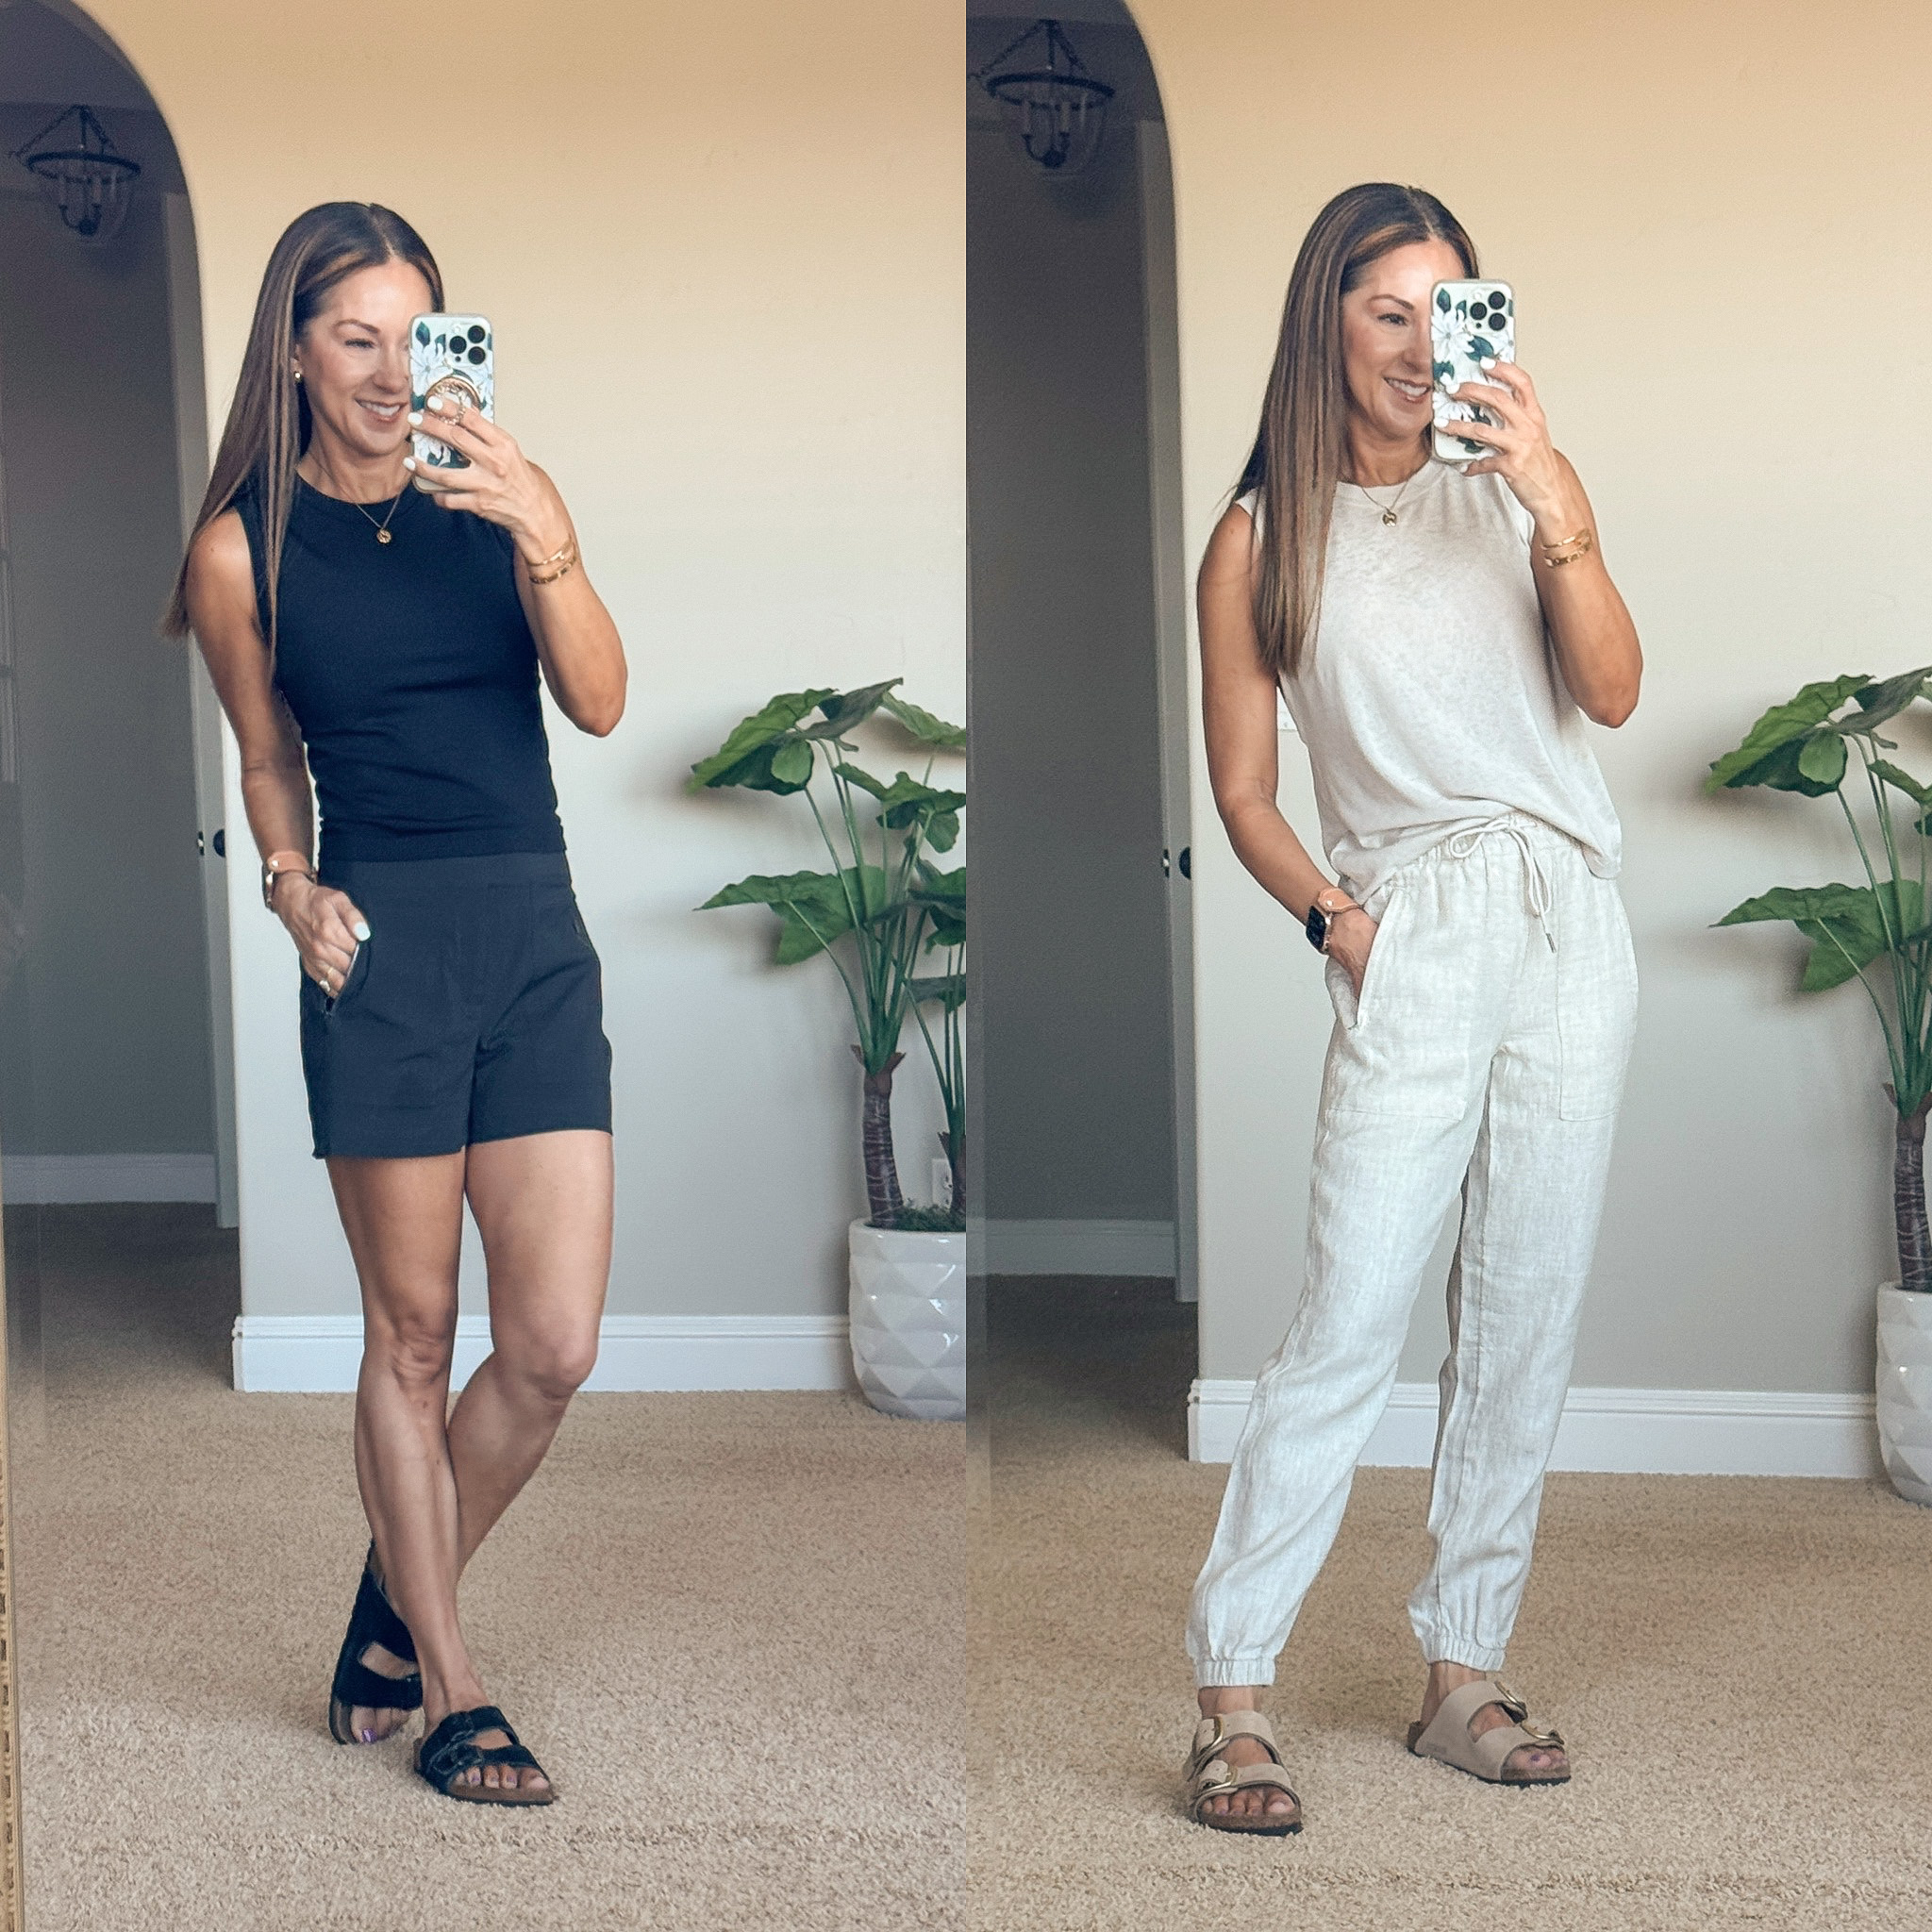 may outfit recap: trending fashion and favorite finds | may, outfit round up, fashion, trending fashion, affordable fashion, summer outfit inspo, neutral fashion, athleisure, athleisure outfit, loungewear, sandals